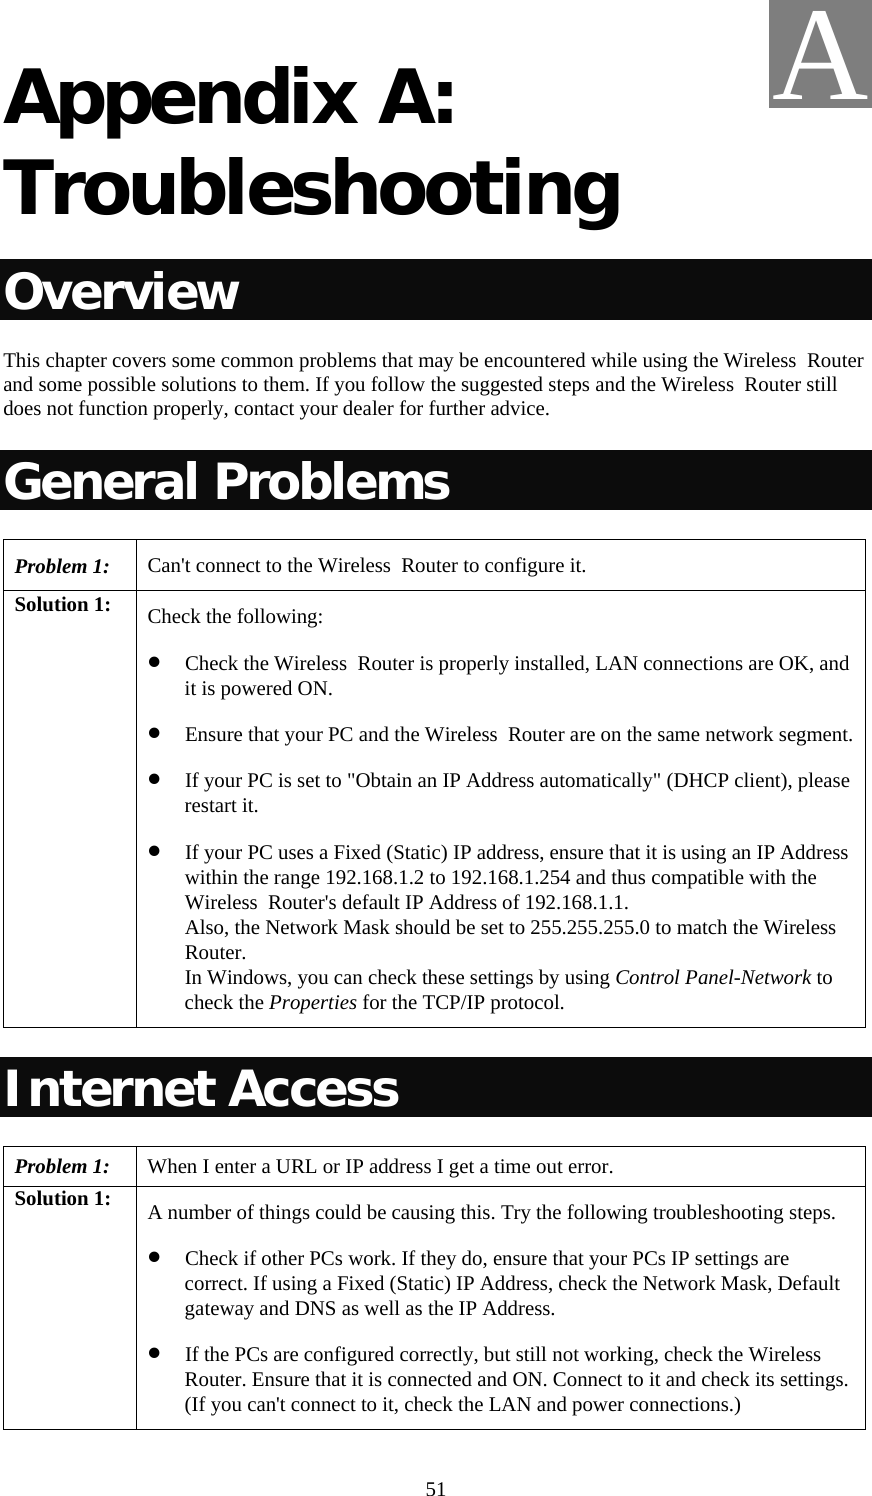   51 Appendix A: Troubleshooting Overview This chapter covers some common problems that may be encountered while using the Wireless  Router and some possible solutions to them. If you follow the suggested steps and the Wireless  Router still does not function properly, contact your dealer for further advice. General Problems Problem 1:  Can&apos;t connect to the Wireless  Router to configure it. Solution 1:  Check the following: • Check the Wireless  Router is properly installed, LAN connections are OK, and it is powered ON. • Ensure that your PC and the Wireless  Router are on the same network segment. • If your PC is set to &quot;Obtain an IP Address automatically&quot; (DHCP client), please restart it. • If your PC uses a Fixed (Static) IP address, ensure that it is using an IP Address within the range 192.168.1.2 to 192.168.1.254 and thus compatible with the Wireless  Router&apos;s default IP Address of 192.168.1.1.  Also, the Network Mask should be set to 255.255.255.0 to match the Wireless  Router. In Windows, you can check these settings by using Control Panel-Network to check the Properties for the TCP/IP protocol.  Internet Access Problem 1: When I enter a URL or IP address I get a time out error. Solution 1:  A number of things could be causing this. Try the following troubleshooting steps. • Check if other PCs work. If they do, ensure that your PCs IP settings are correct. If using a Fixed (Static) IP Address, check the Network Mask, Default gateway and DNS as well as the IP Address. • If the PCs are configured correctly, but still not working, check the Wireless  Router. Ensure that it is connected and ON. Connect to it and check its settings. (If you can&apos;t connect to it, check the LAN and power connections.) A